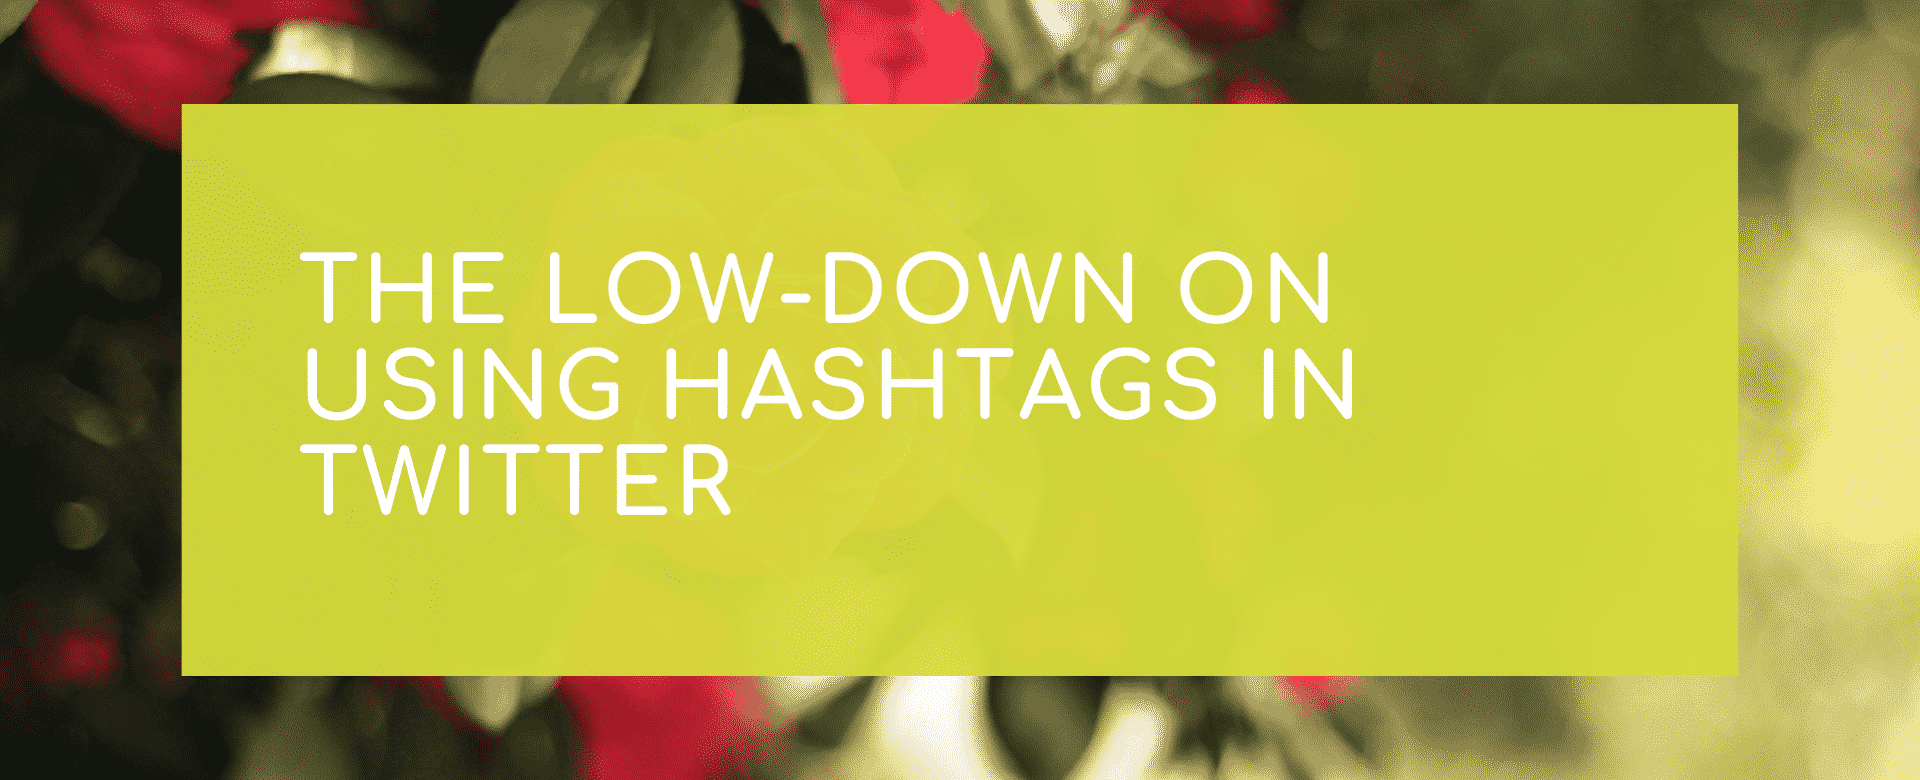 The Low-down on Using Hashtags in Twitter